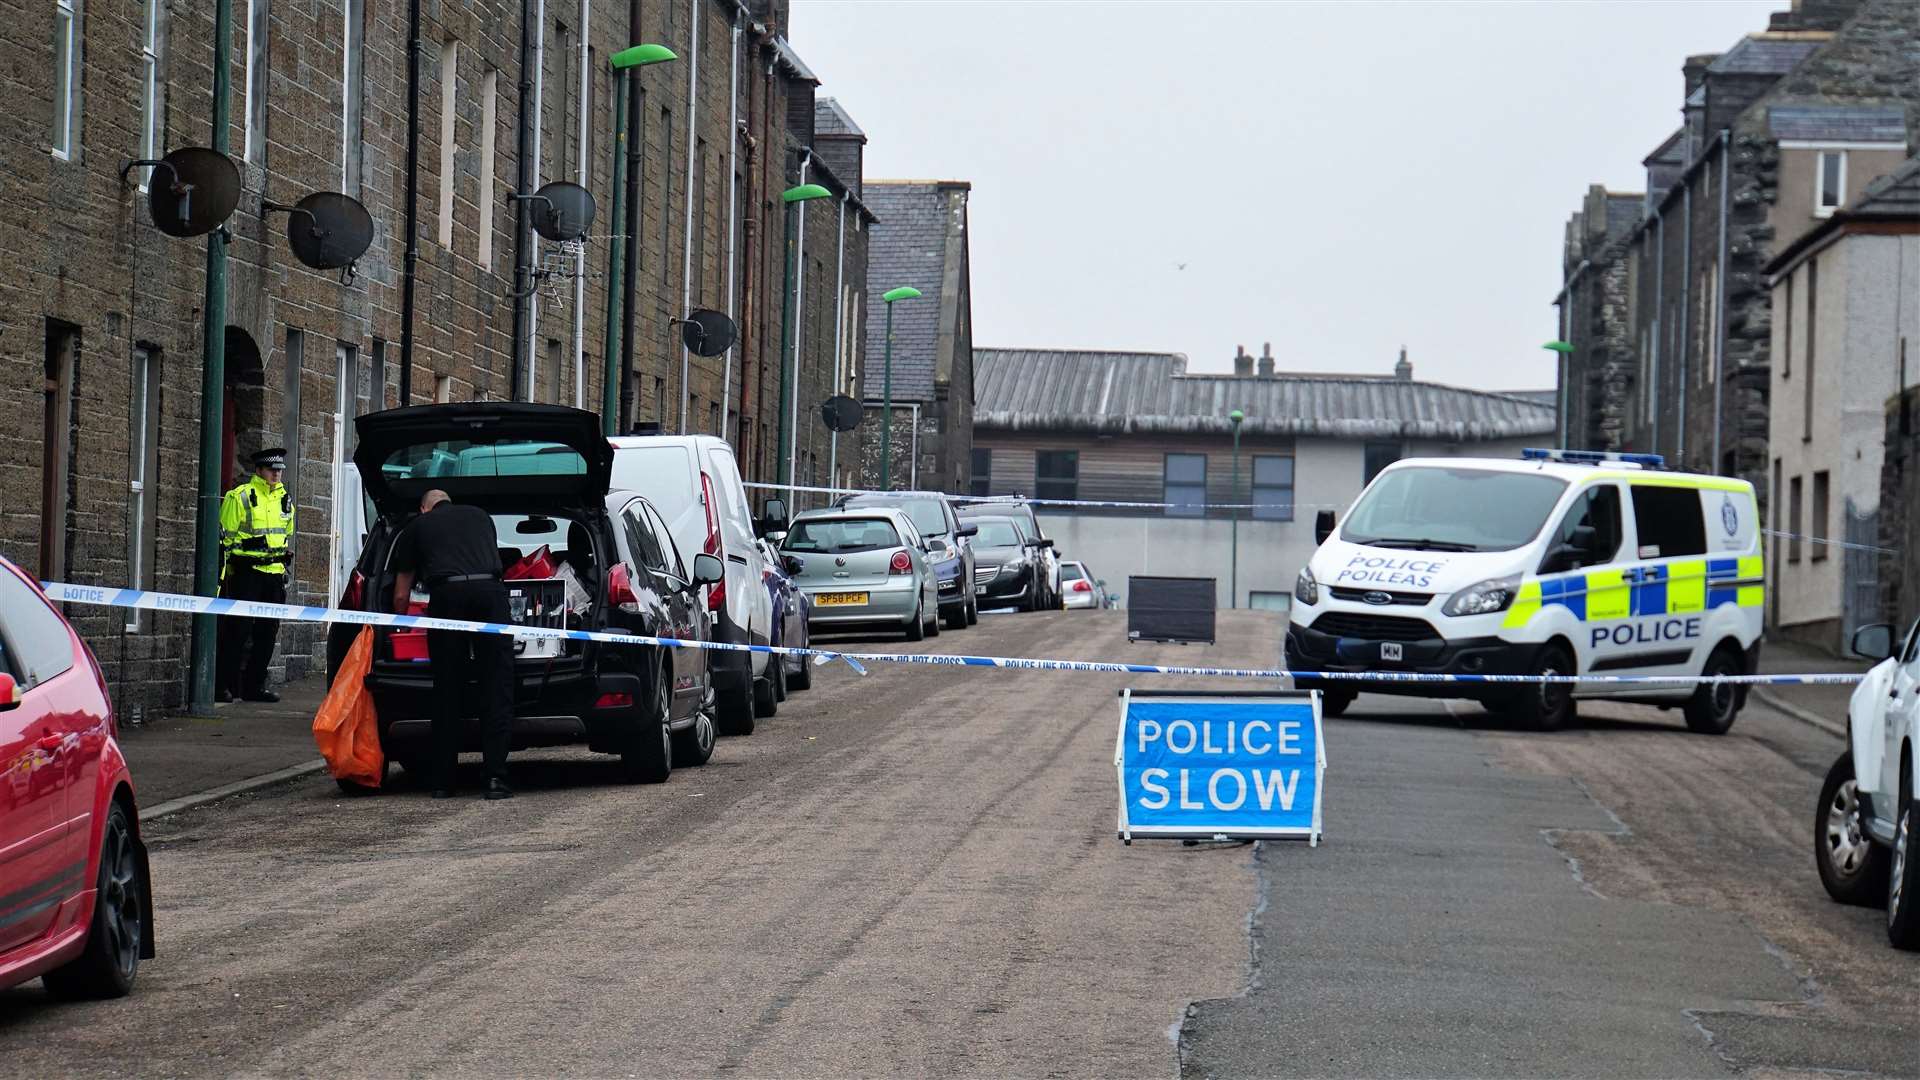 The scene at Barrogill Street was cordoned off after the incident at the weekend. Picture: DGS